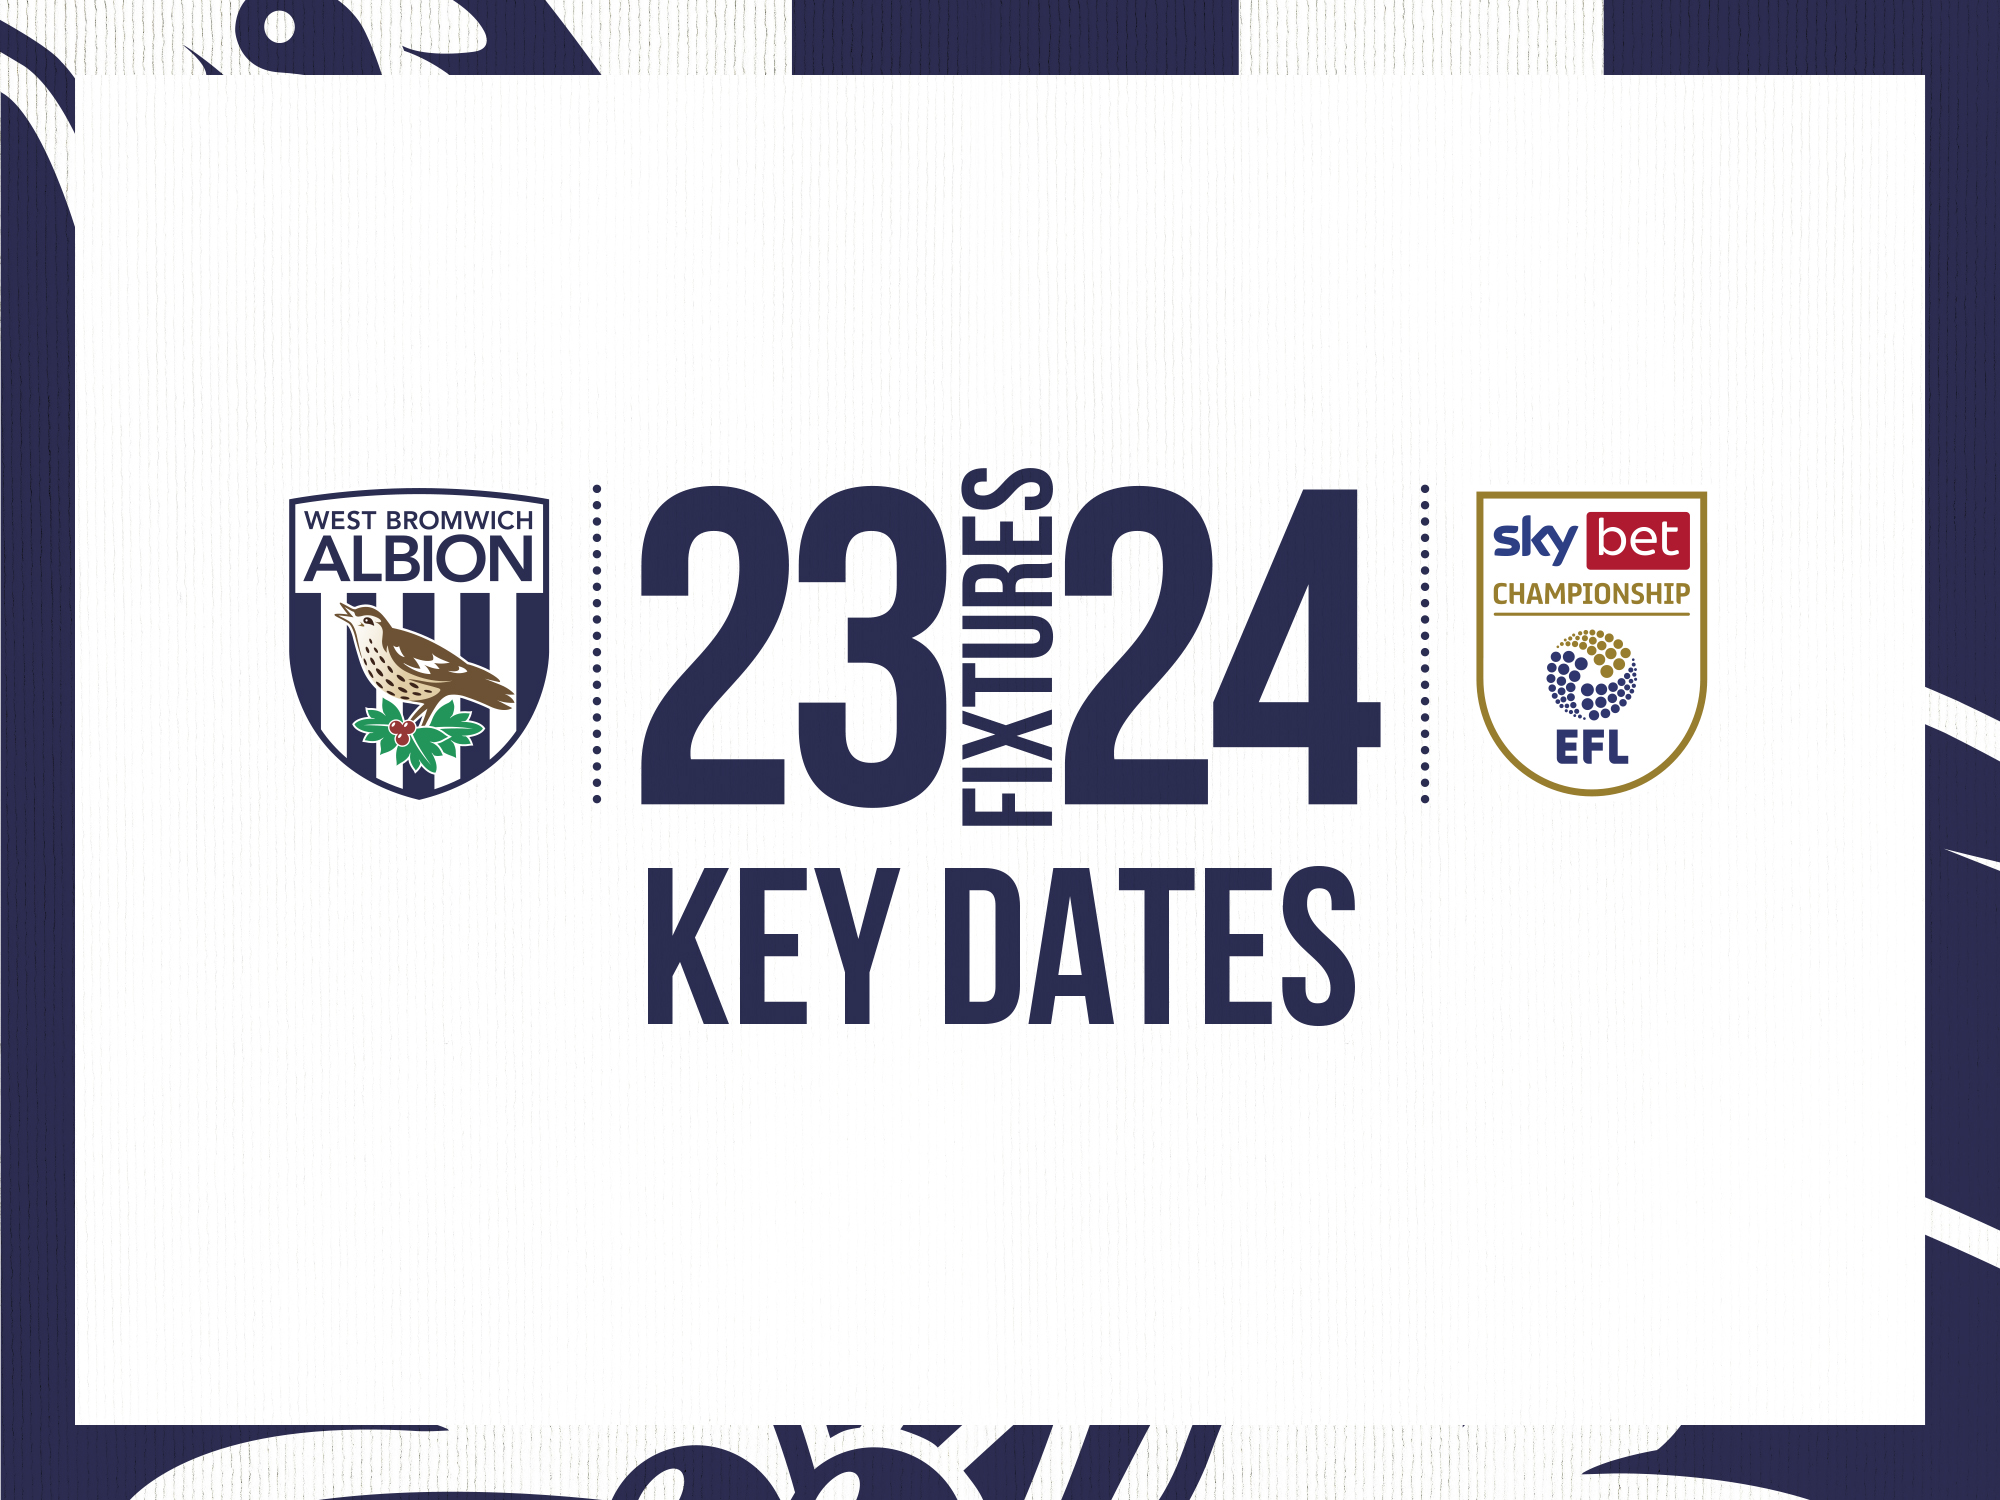 An Albion badge, a Championship badge and key dates written out with the numbers 23 and 24